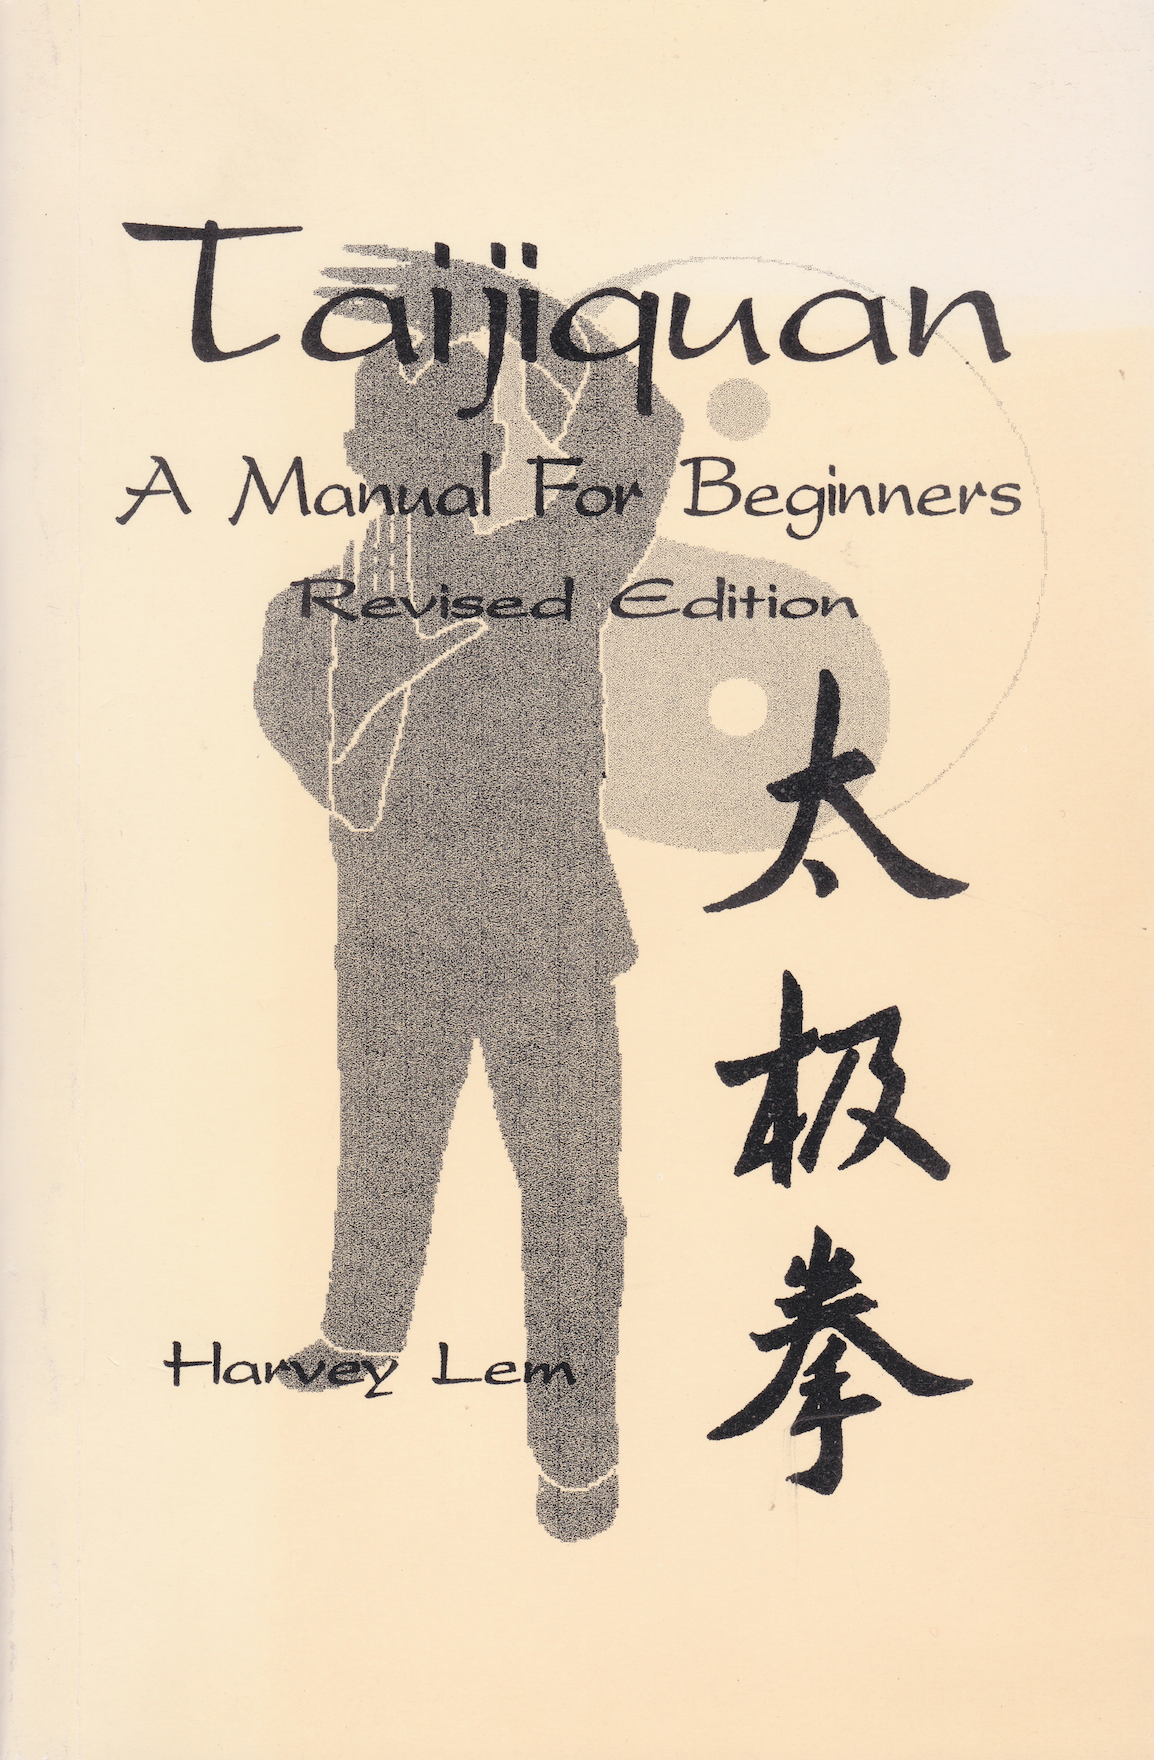 Taijiquan: A Manual for Beginners (Revised Edition) Book by Harvey Lem (SIGNED)(Preowned)